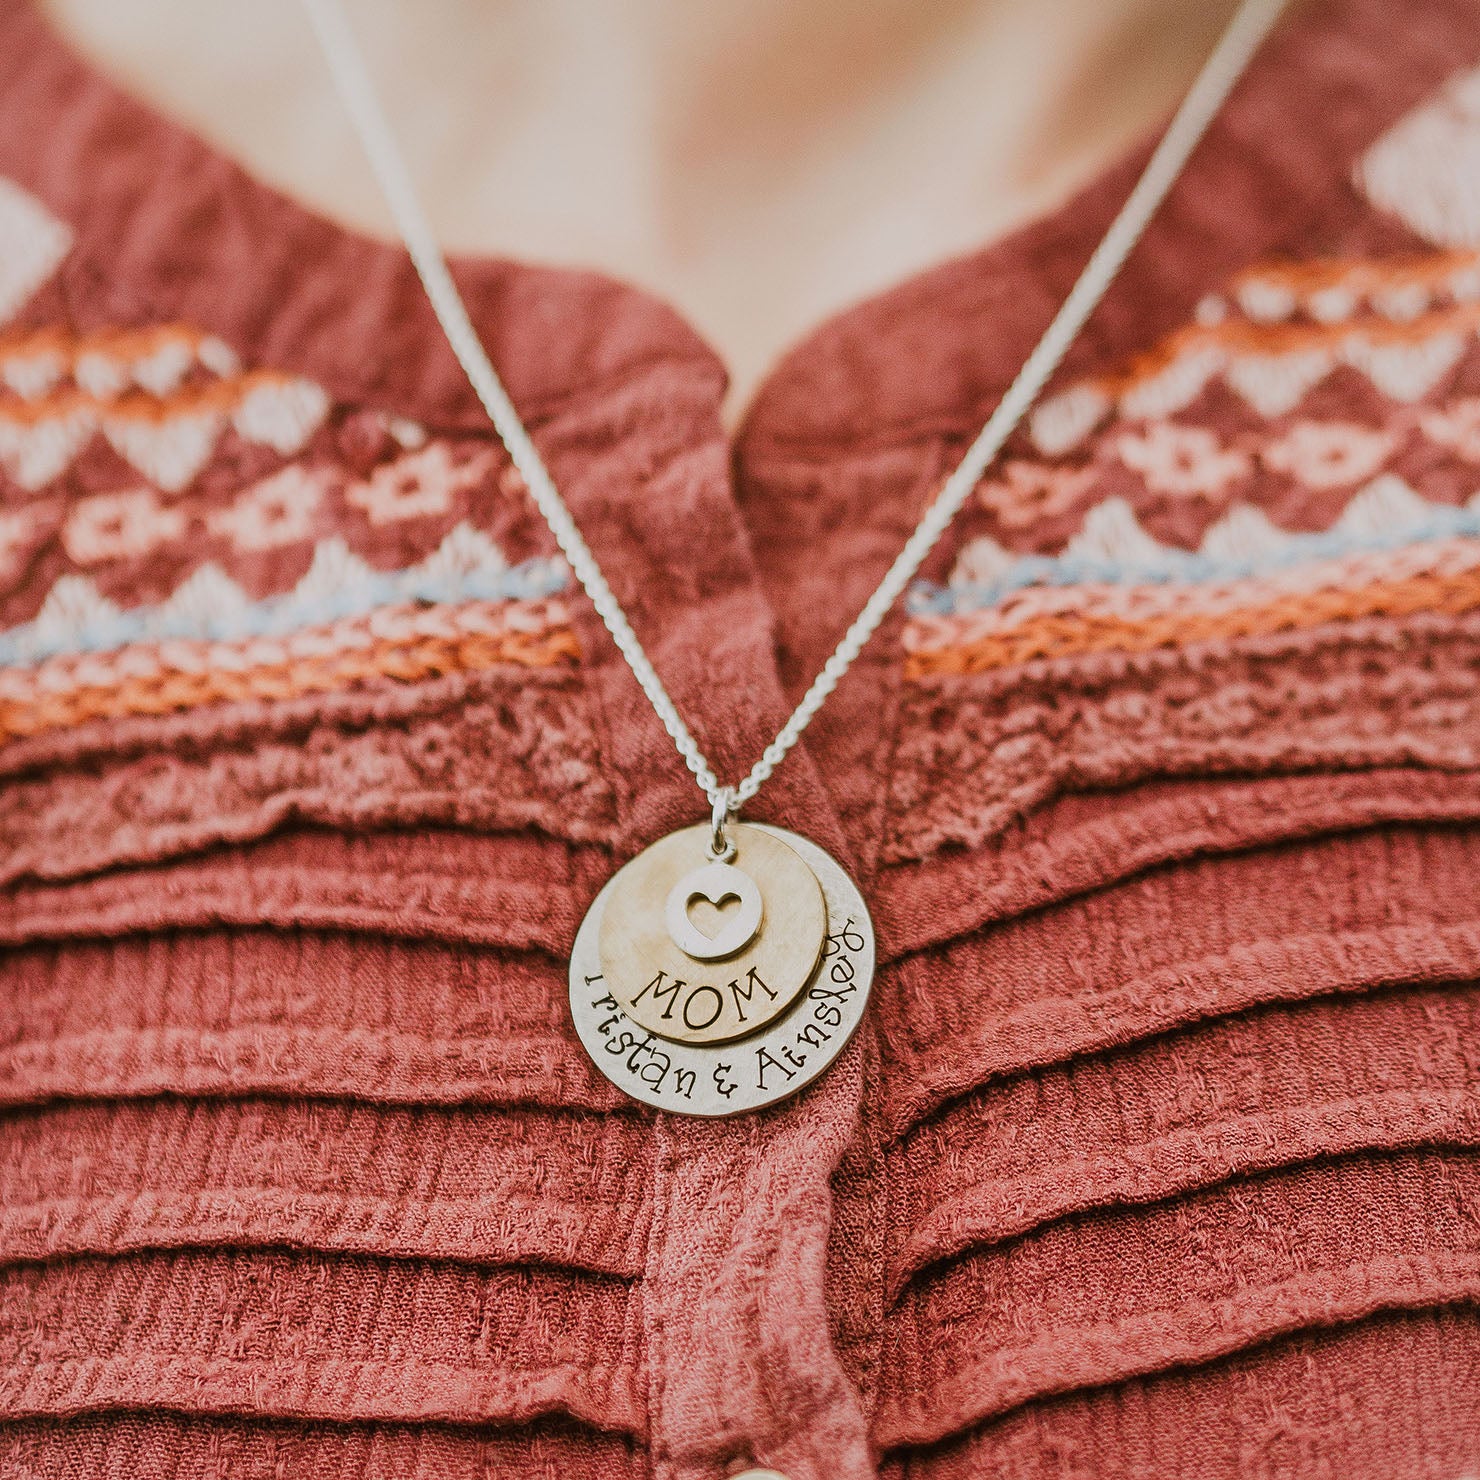 Rustic Silver and Gold Mother's Necklace - Love It Personalized